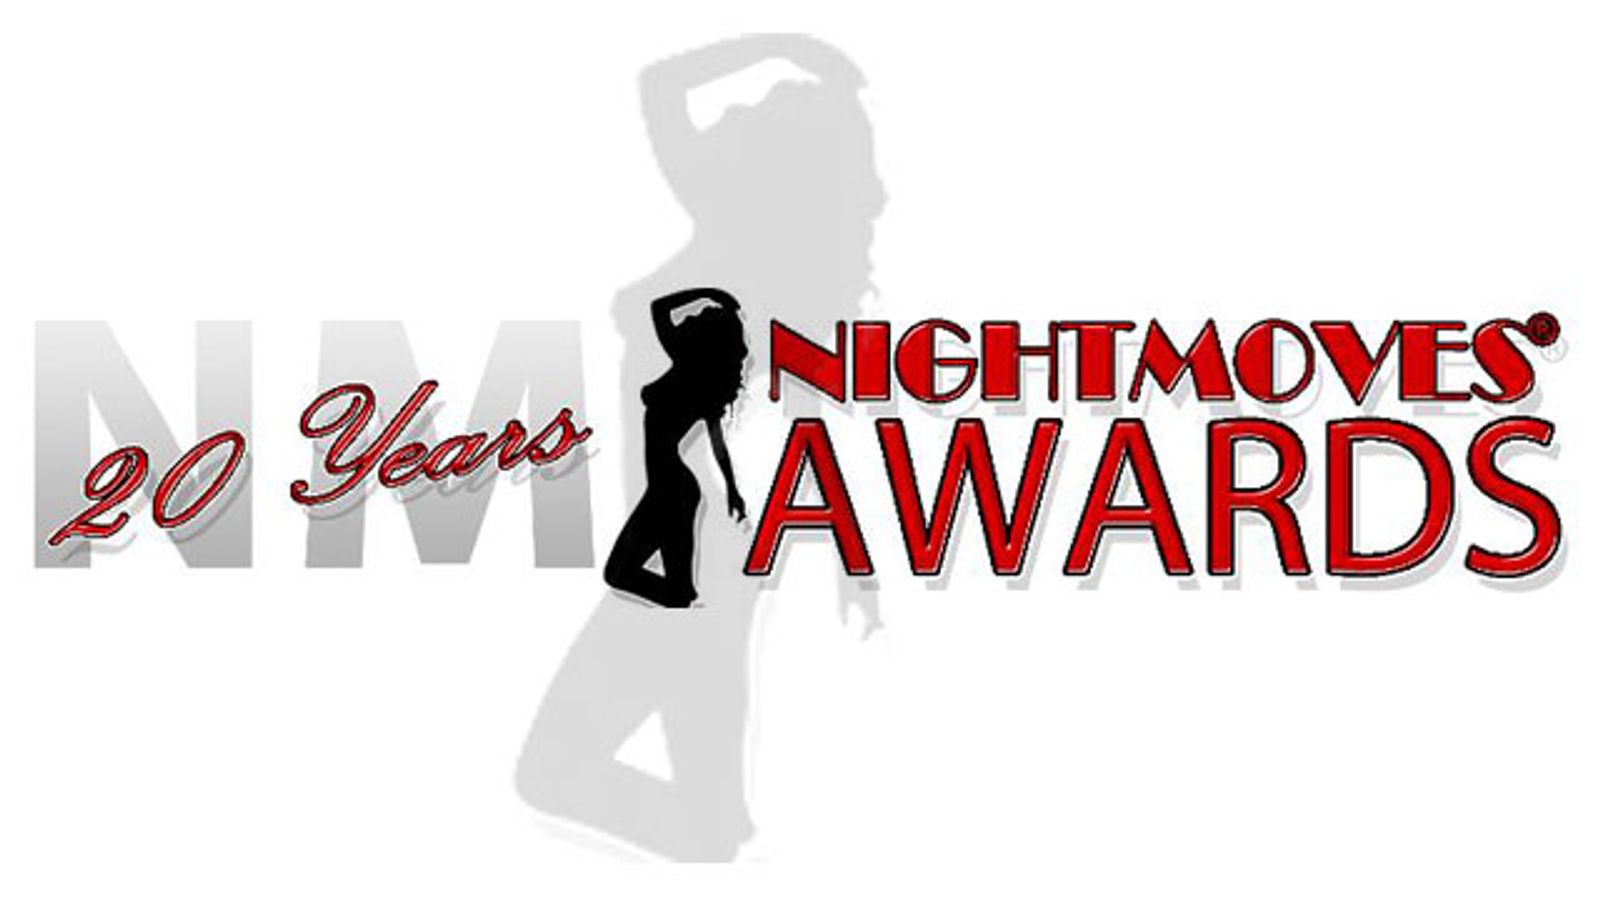 NightMoves Announces Award Nominations & New Categories